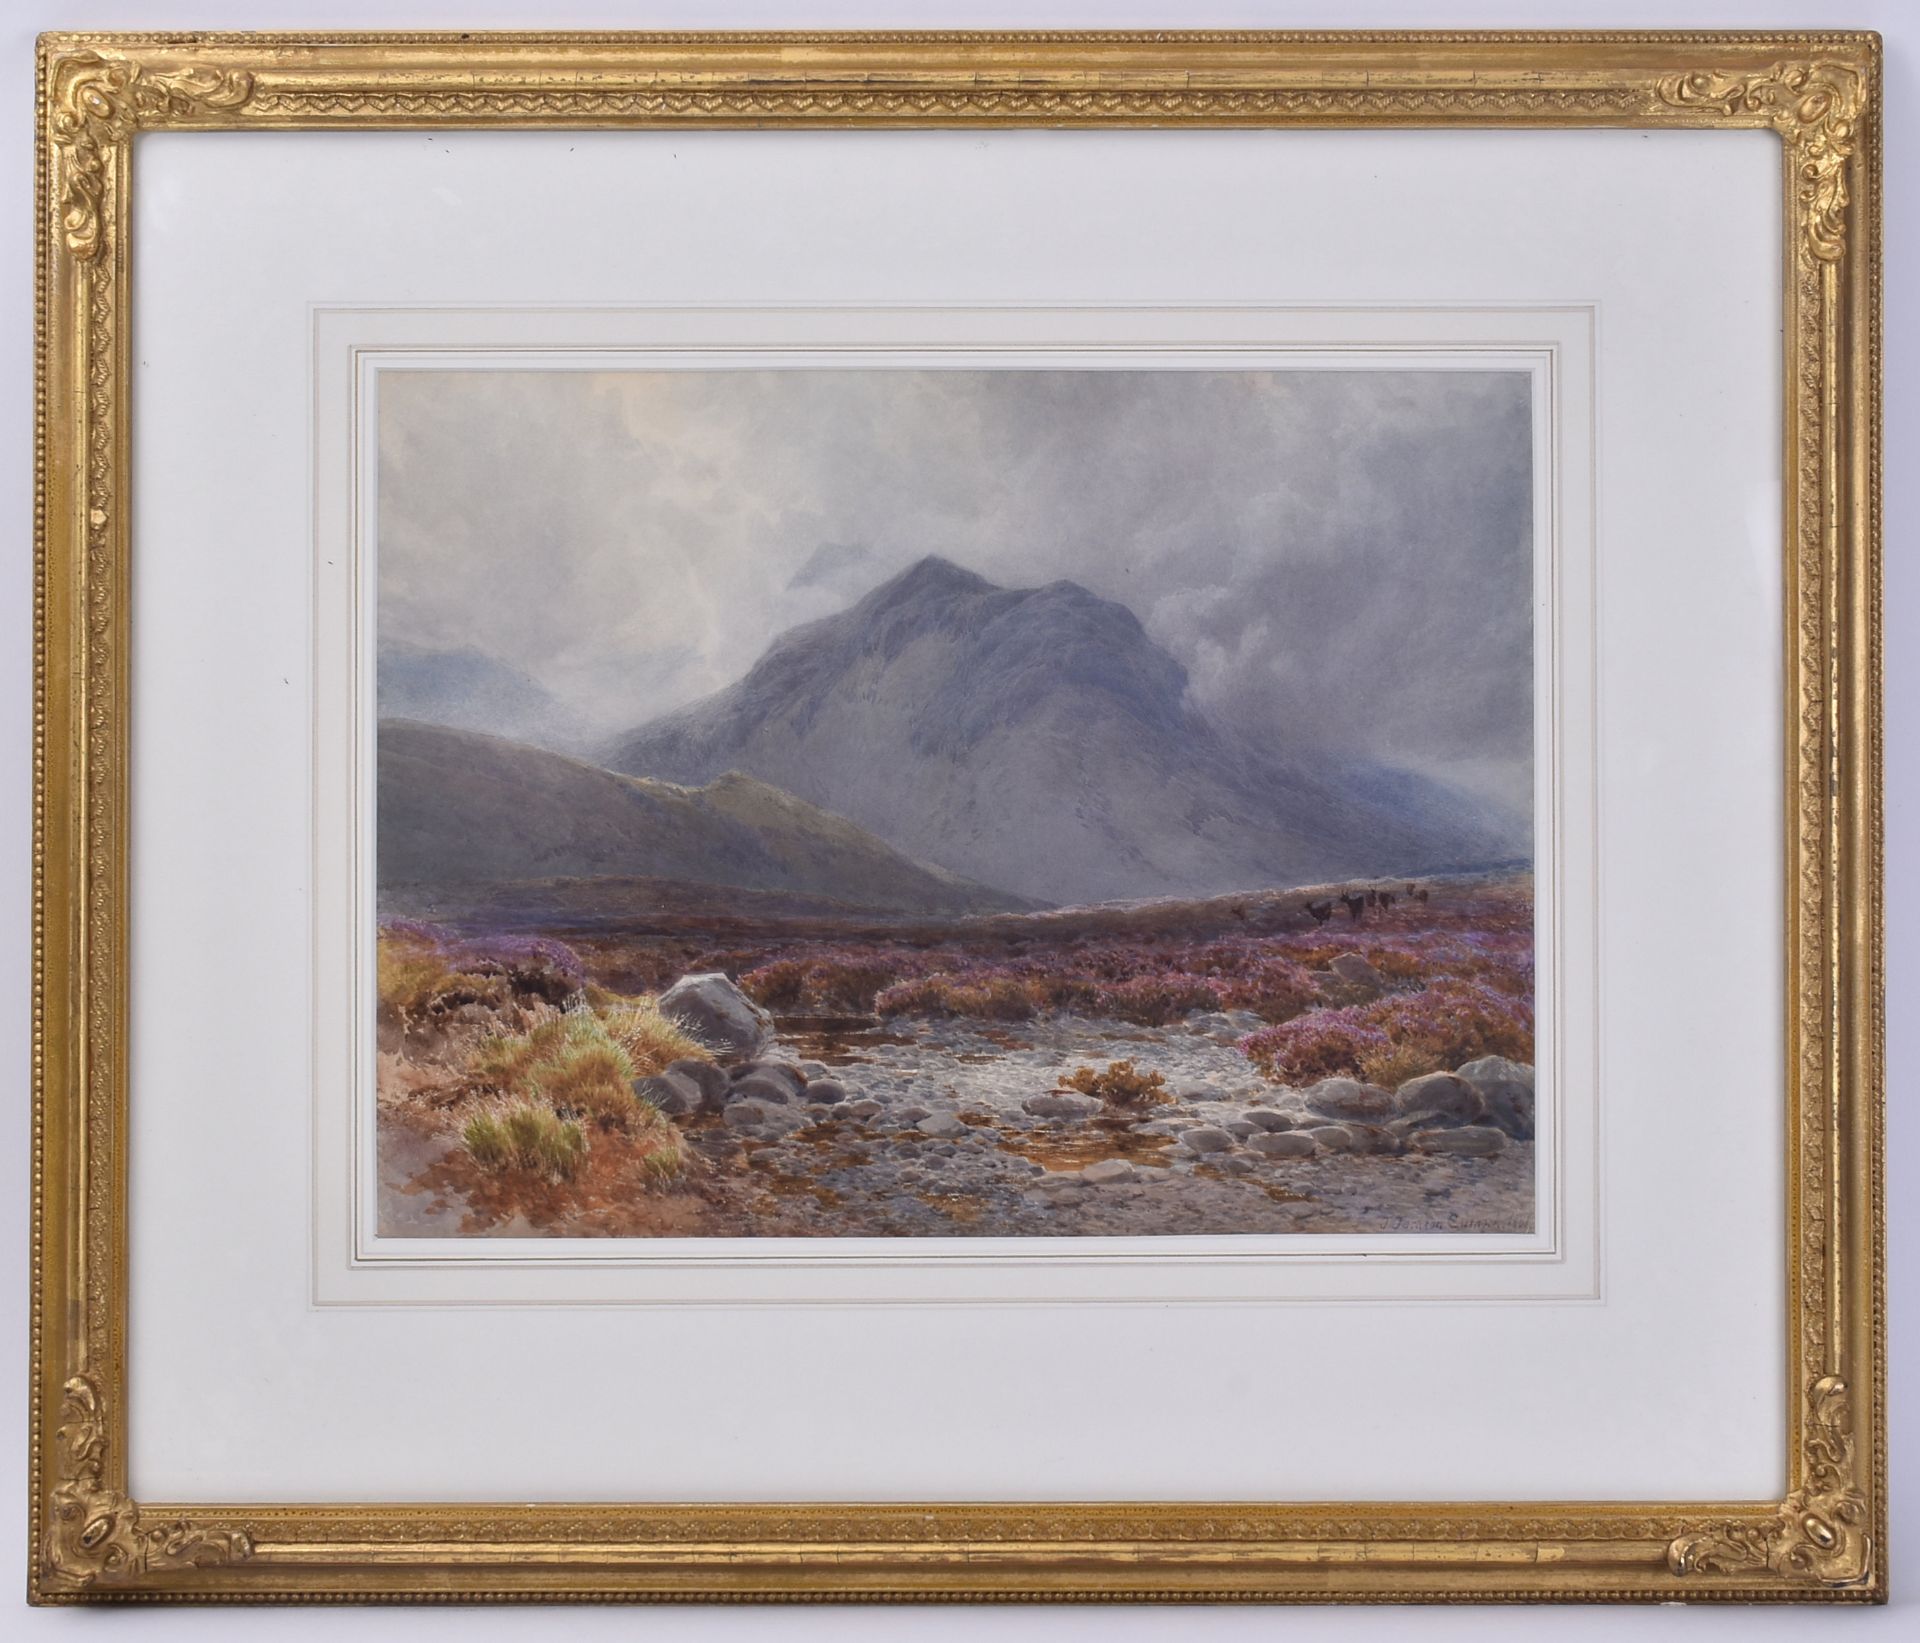 JAMES JACKSON CURNOCK - 1881 WATERCOLOUR ON PAPER PAINTING - Image 2 of 5